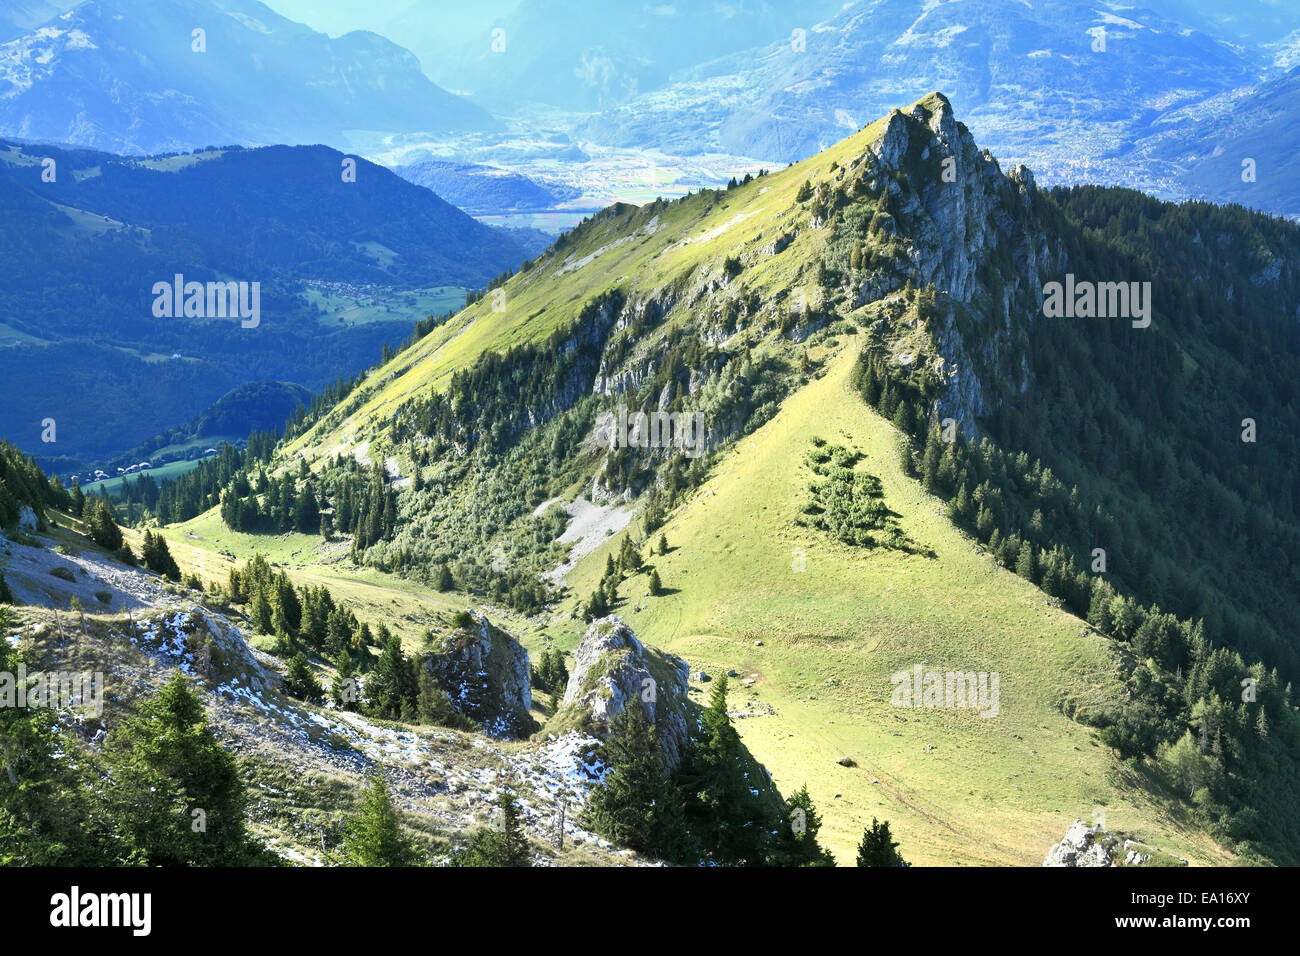 The jagged peaks and gentle alpine meadows Stock Photo